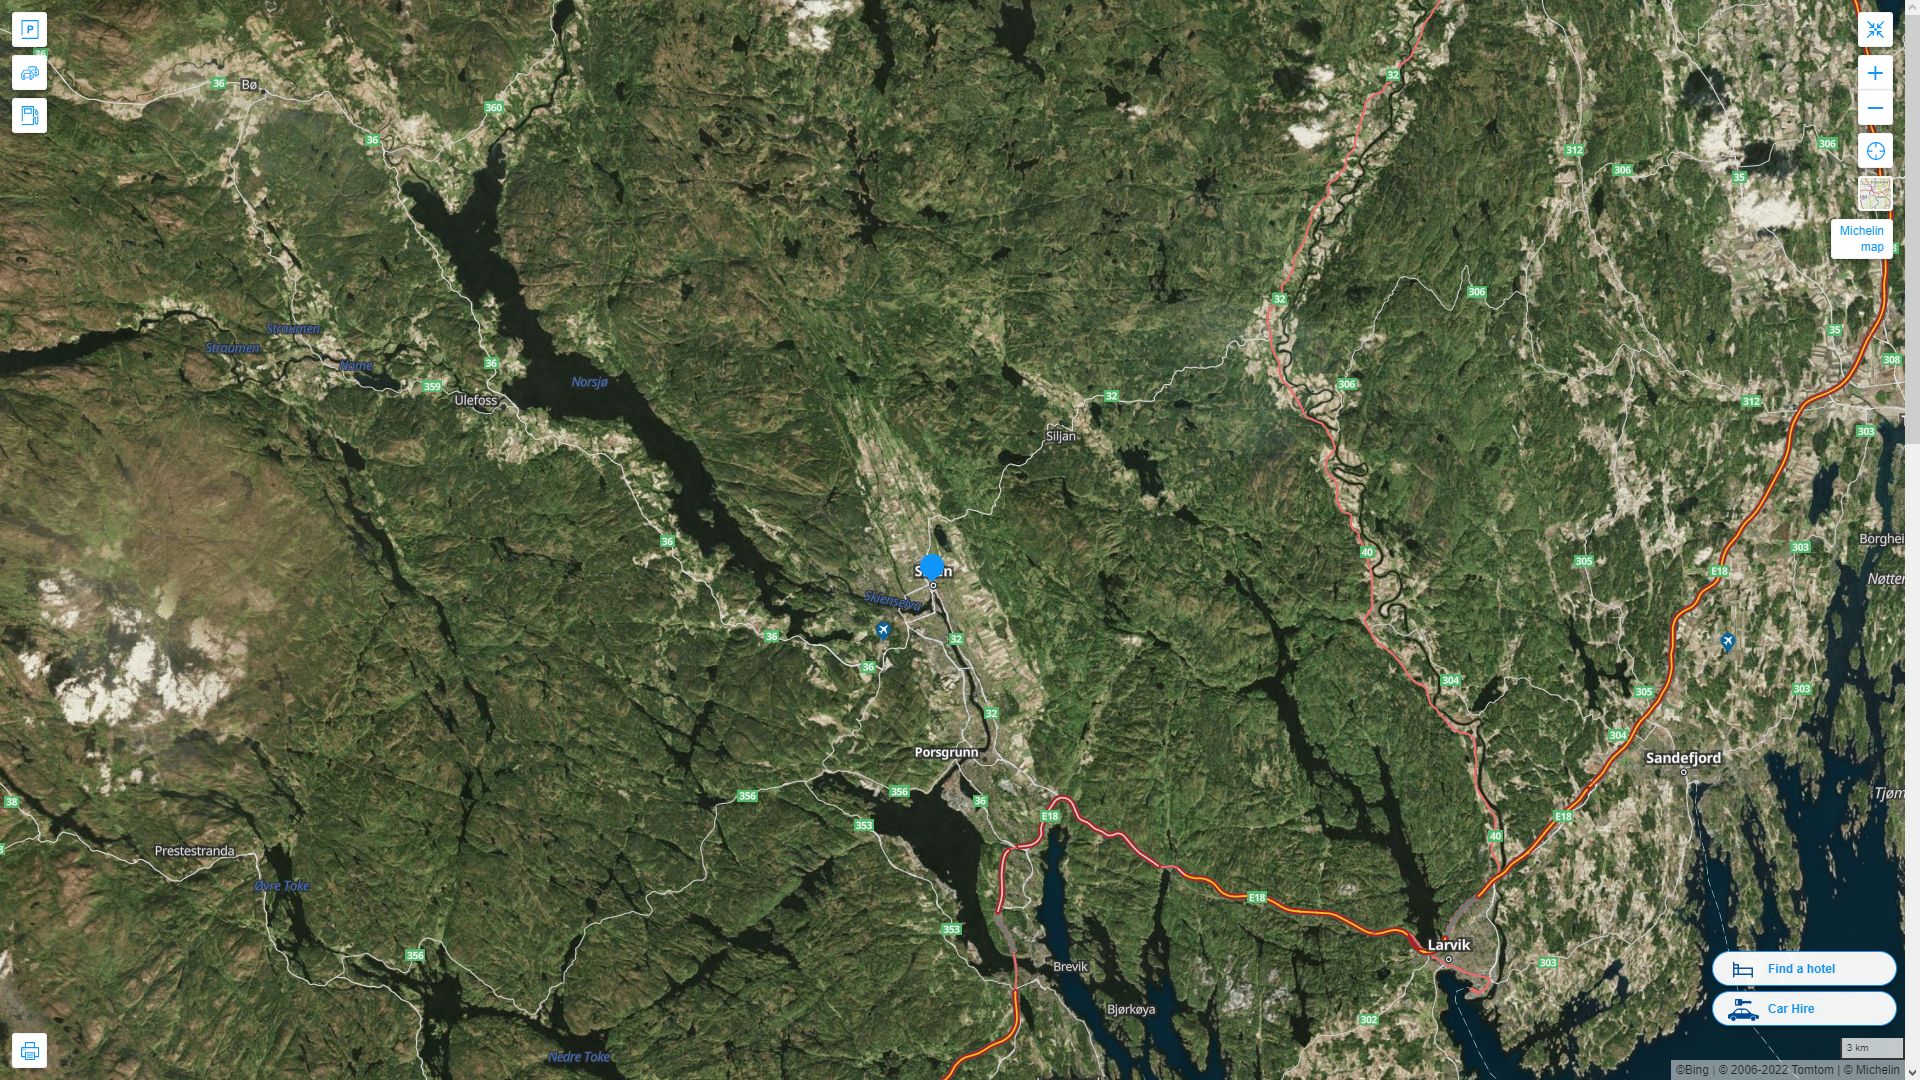 Skien Highway and Road Map with Satellite View